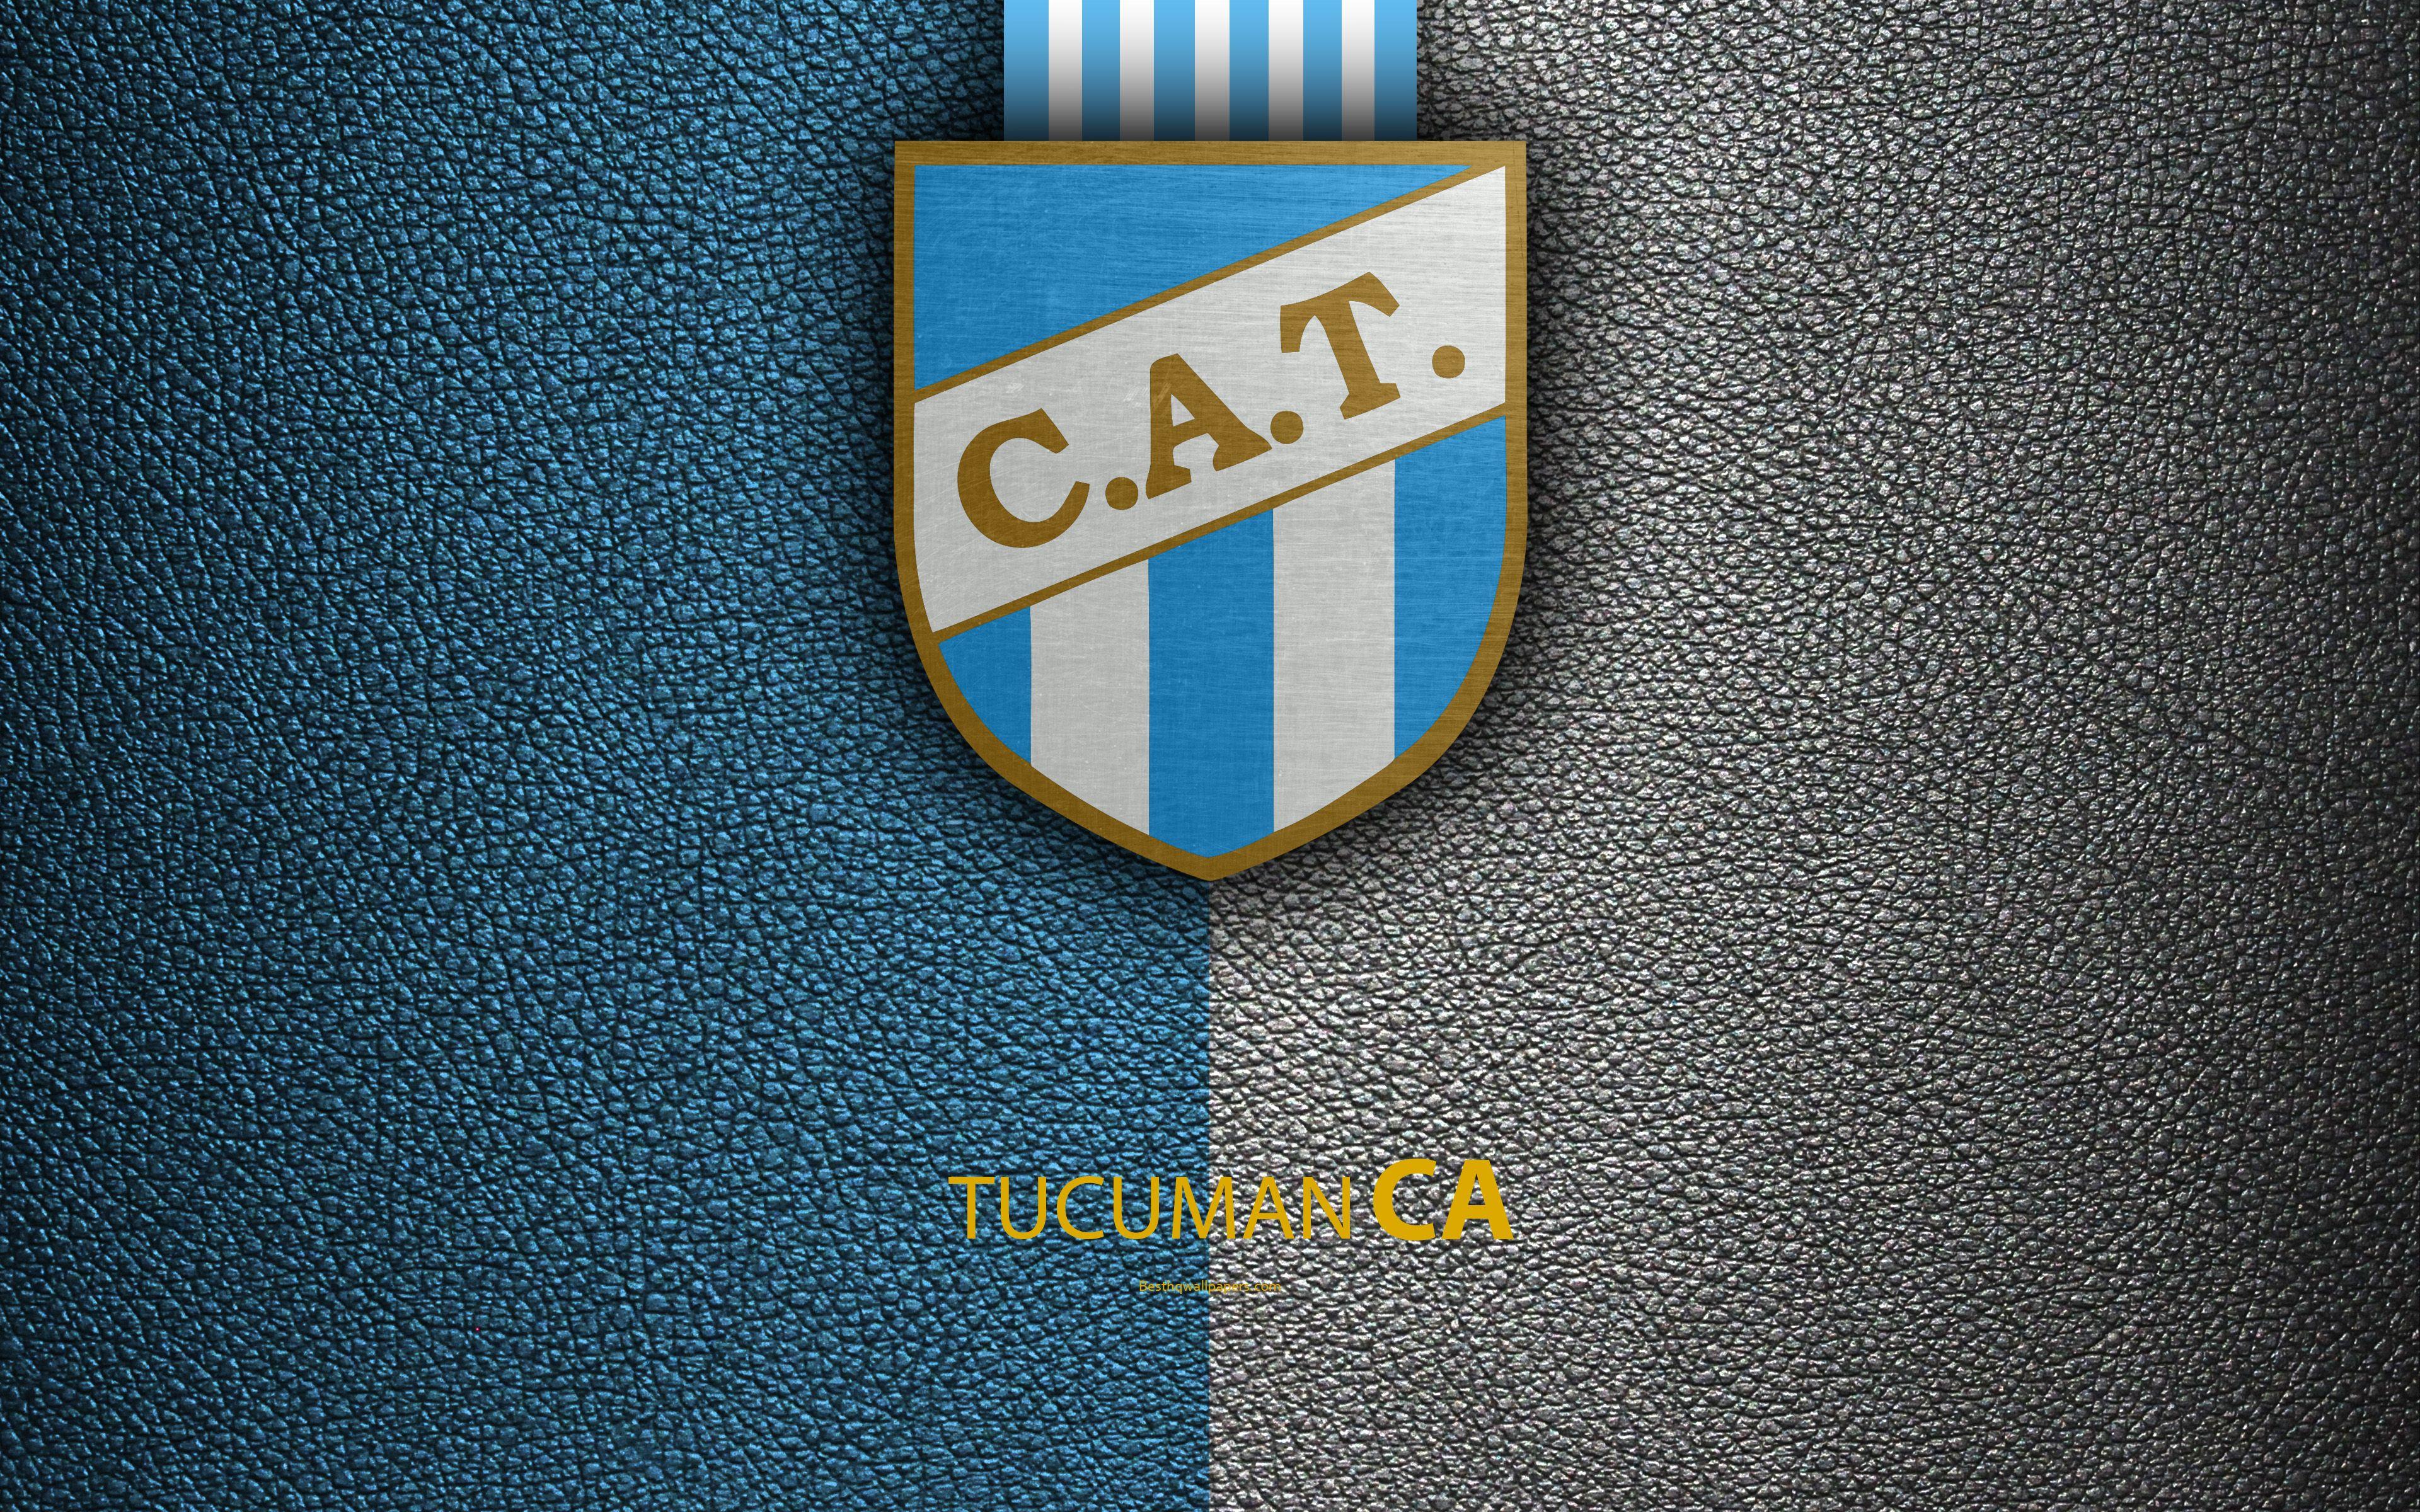 CA San Miguel (w) Football Team from Argentina